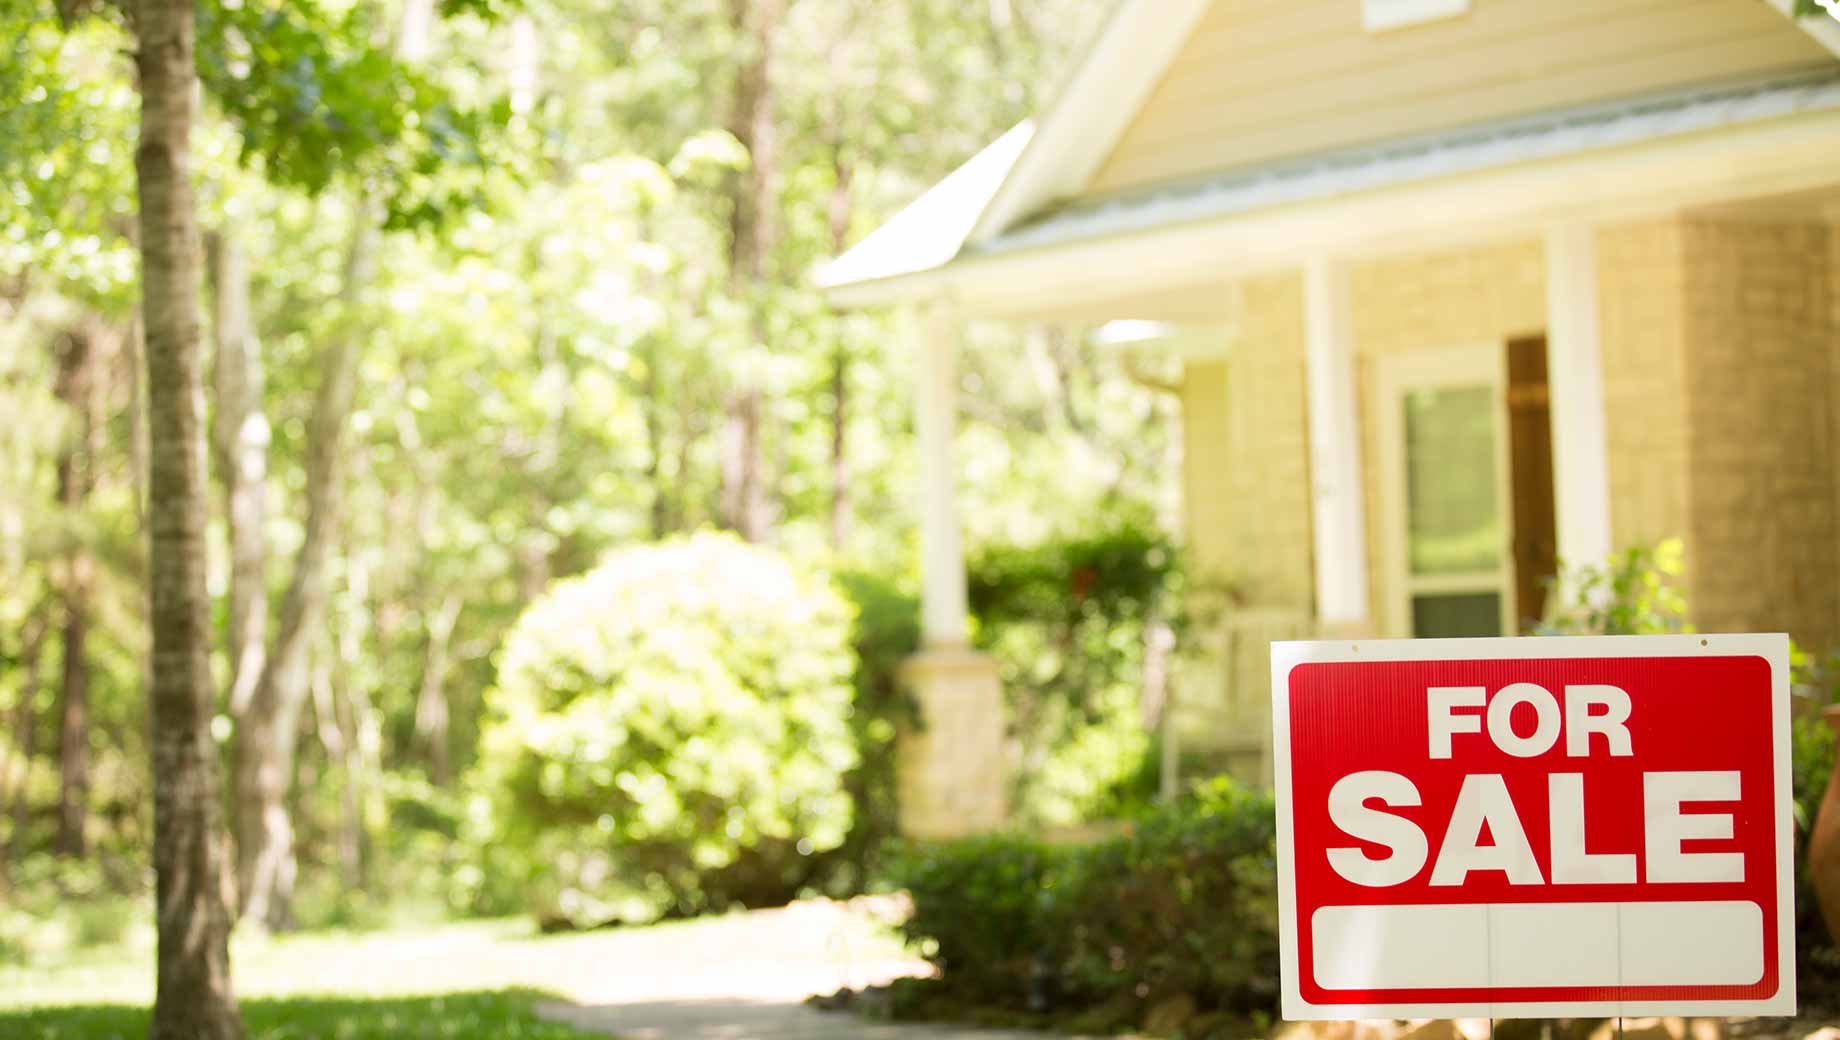 Should You Sell Your Home During the Coronavirus Pandemic?